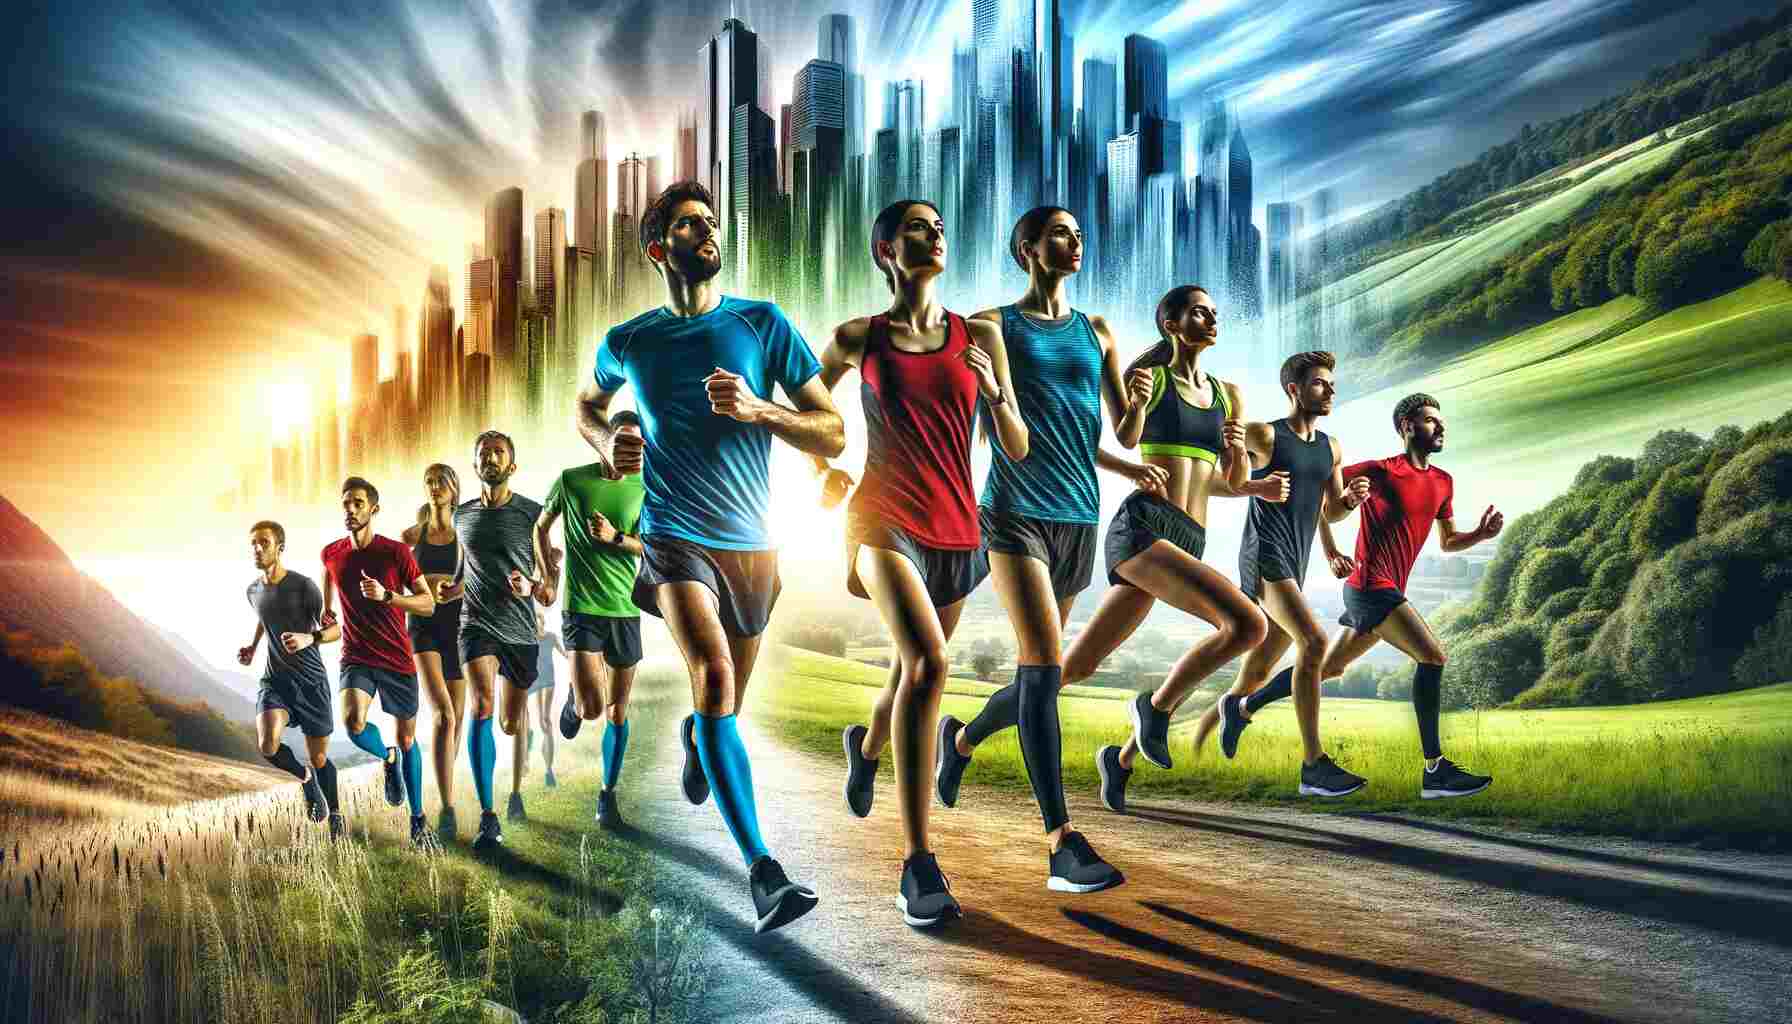 Dynamic image showing a diverse group of runners training for a marathon on a scenic trail that transitions into a cityscape. The runners are wearing vibrant, professional running gear, appearing determined and focused. The background includes clear skies, lush greenery, and urban buildings, capturing the essence of both nature and city running. The image evokes energy, motivation, and camaraderie among the runners.